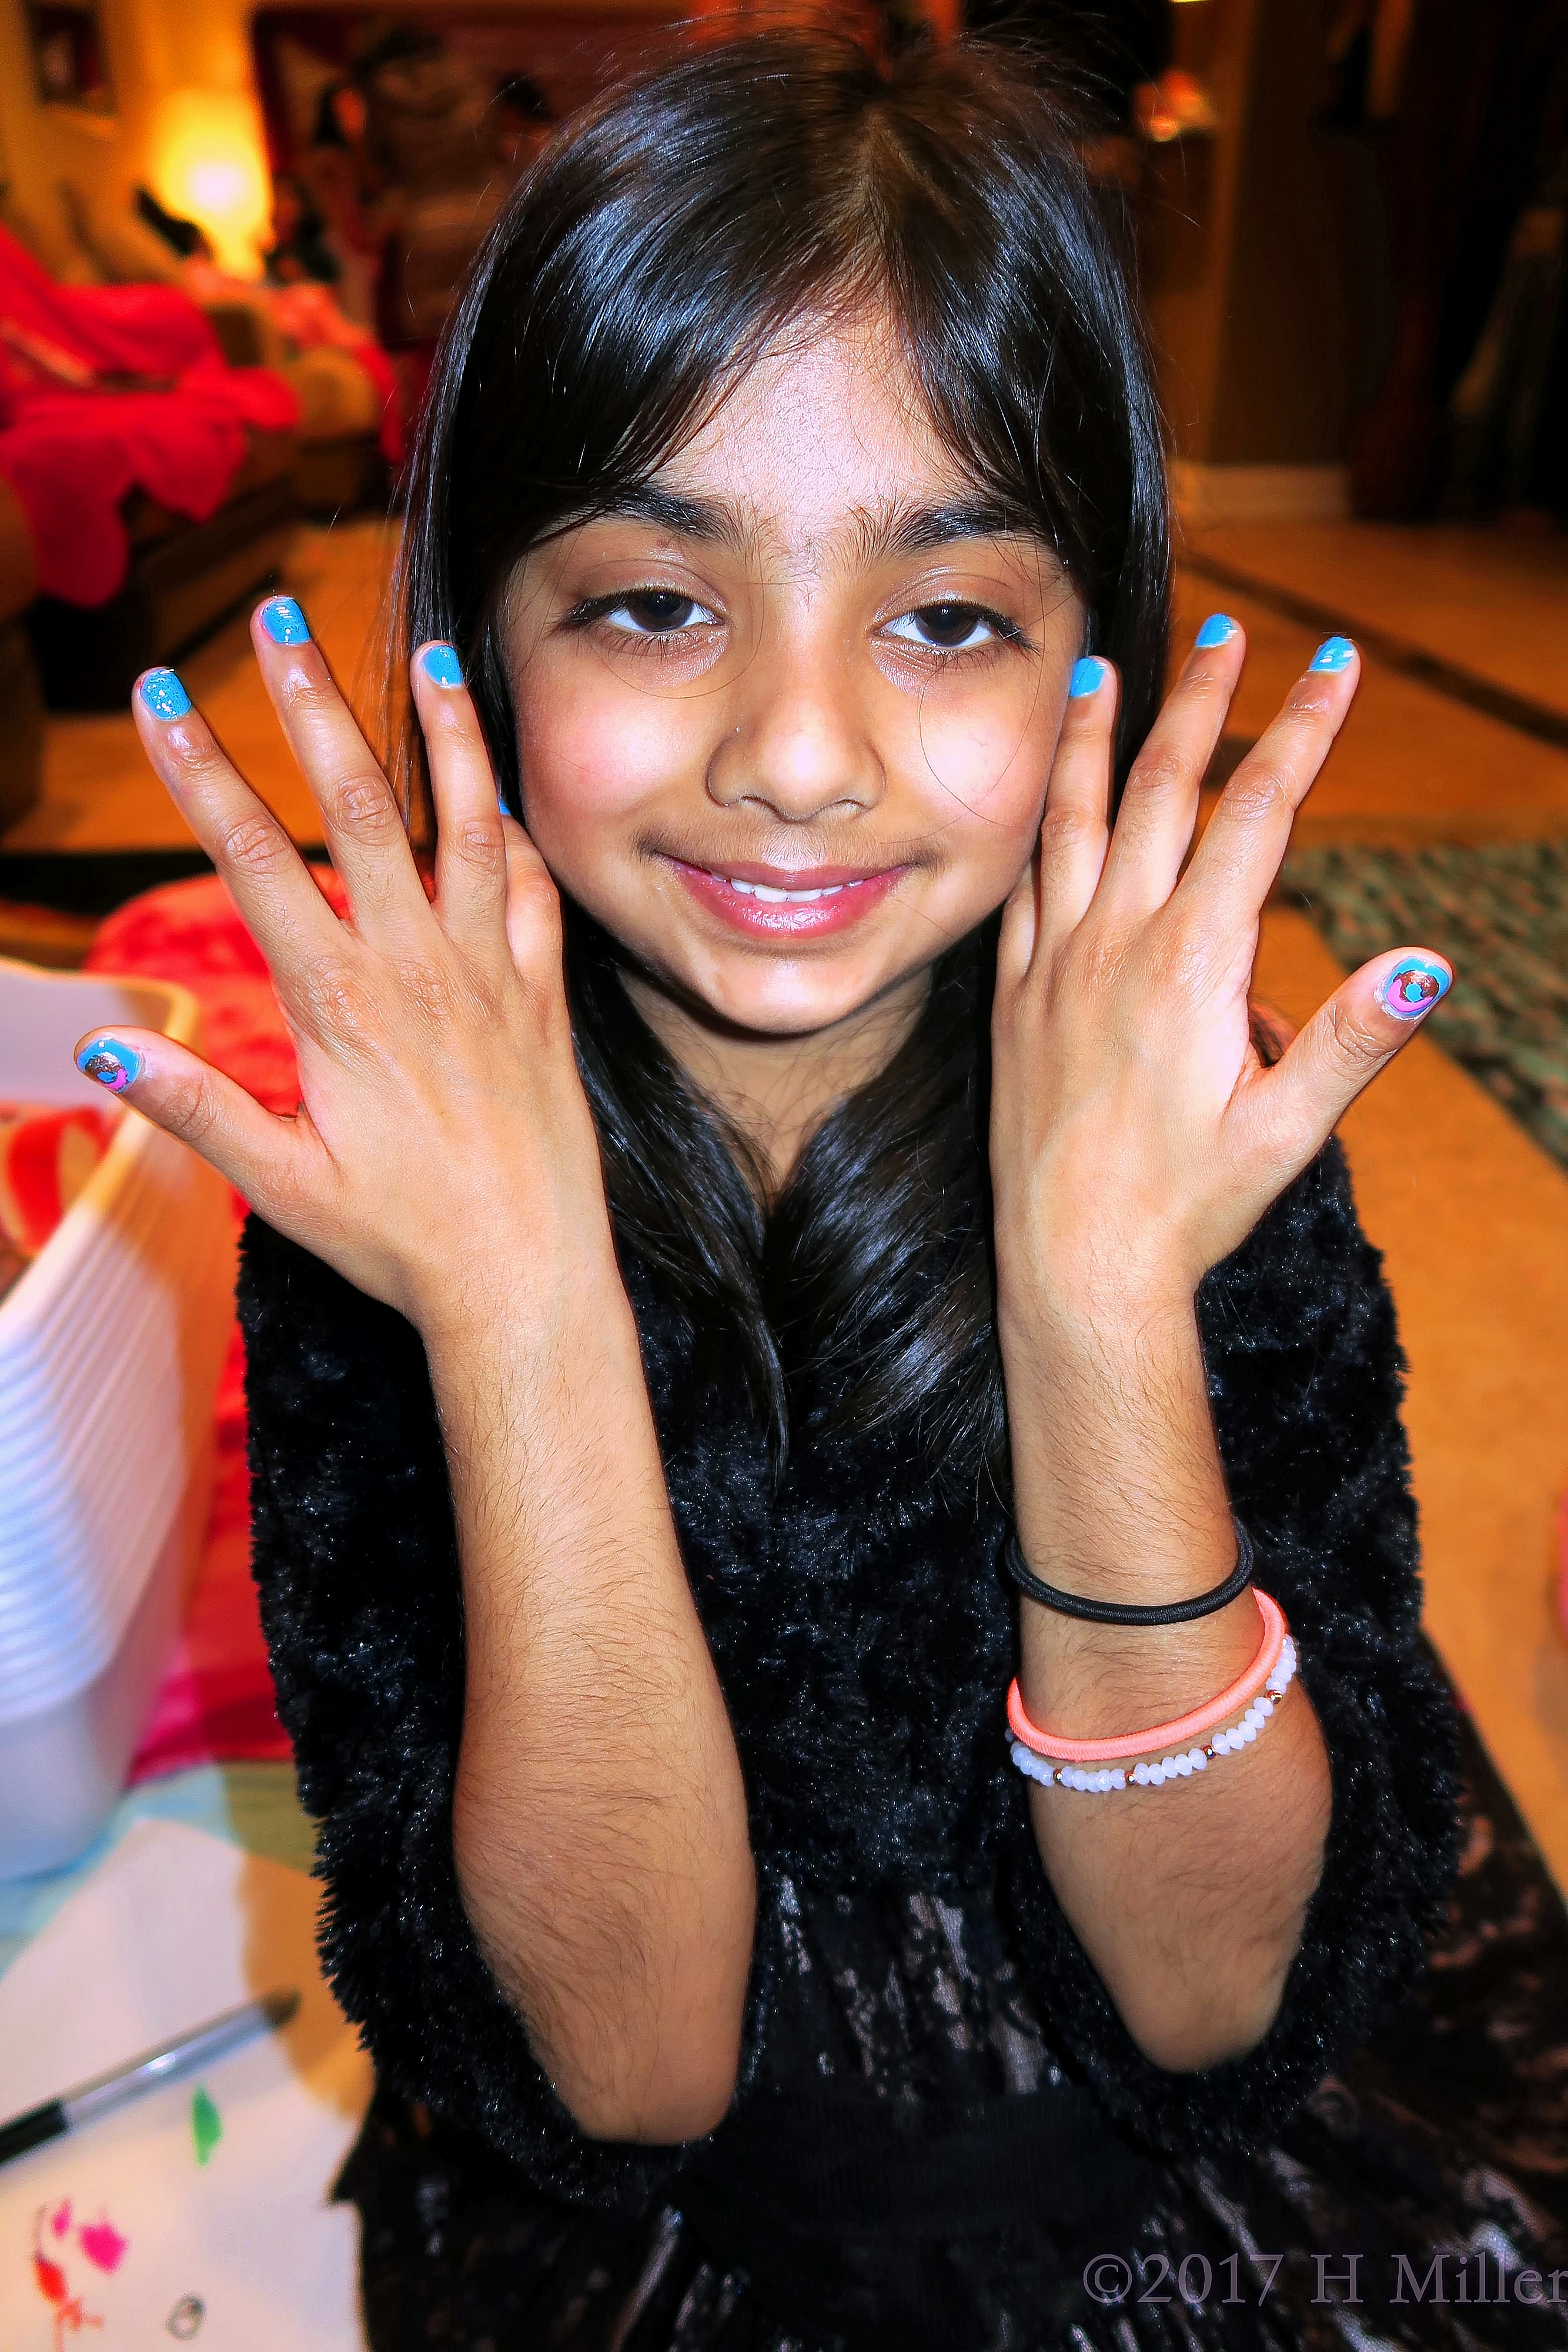 She Loves Her New Mini Manicure From The Kids Spa!